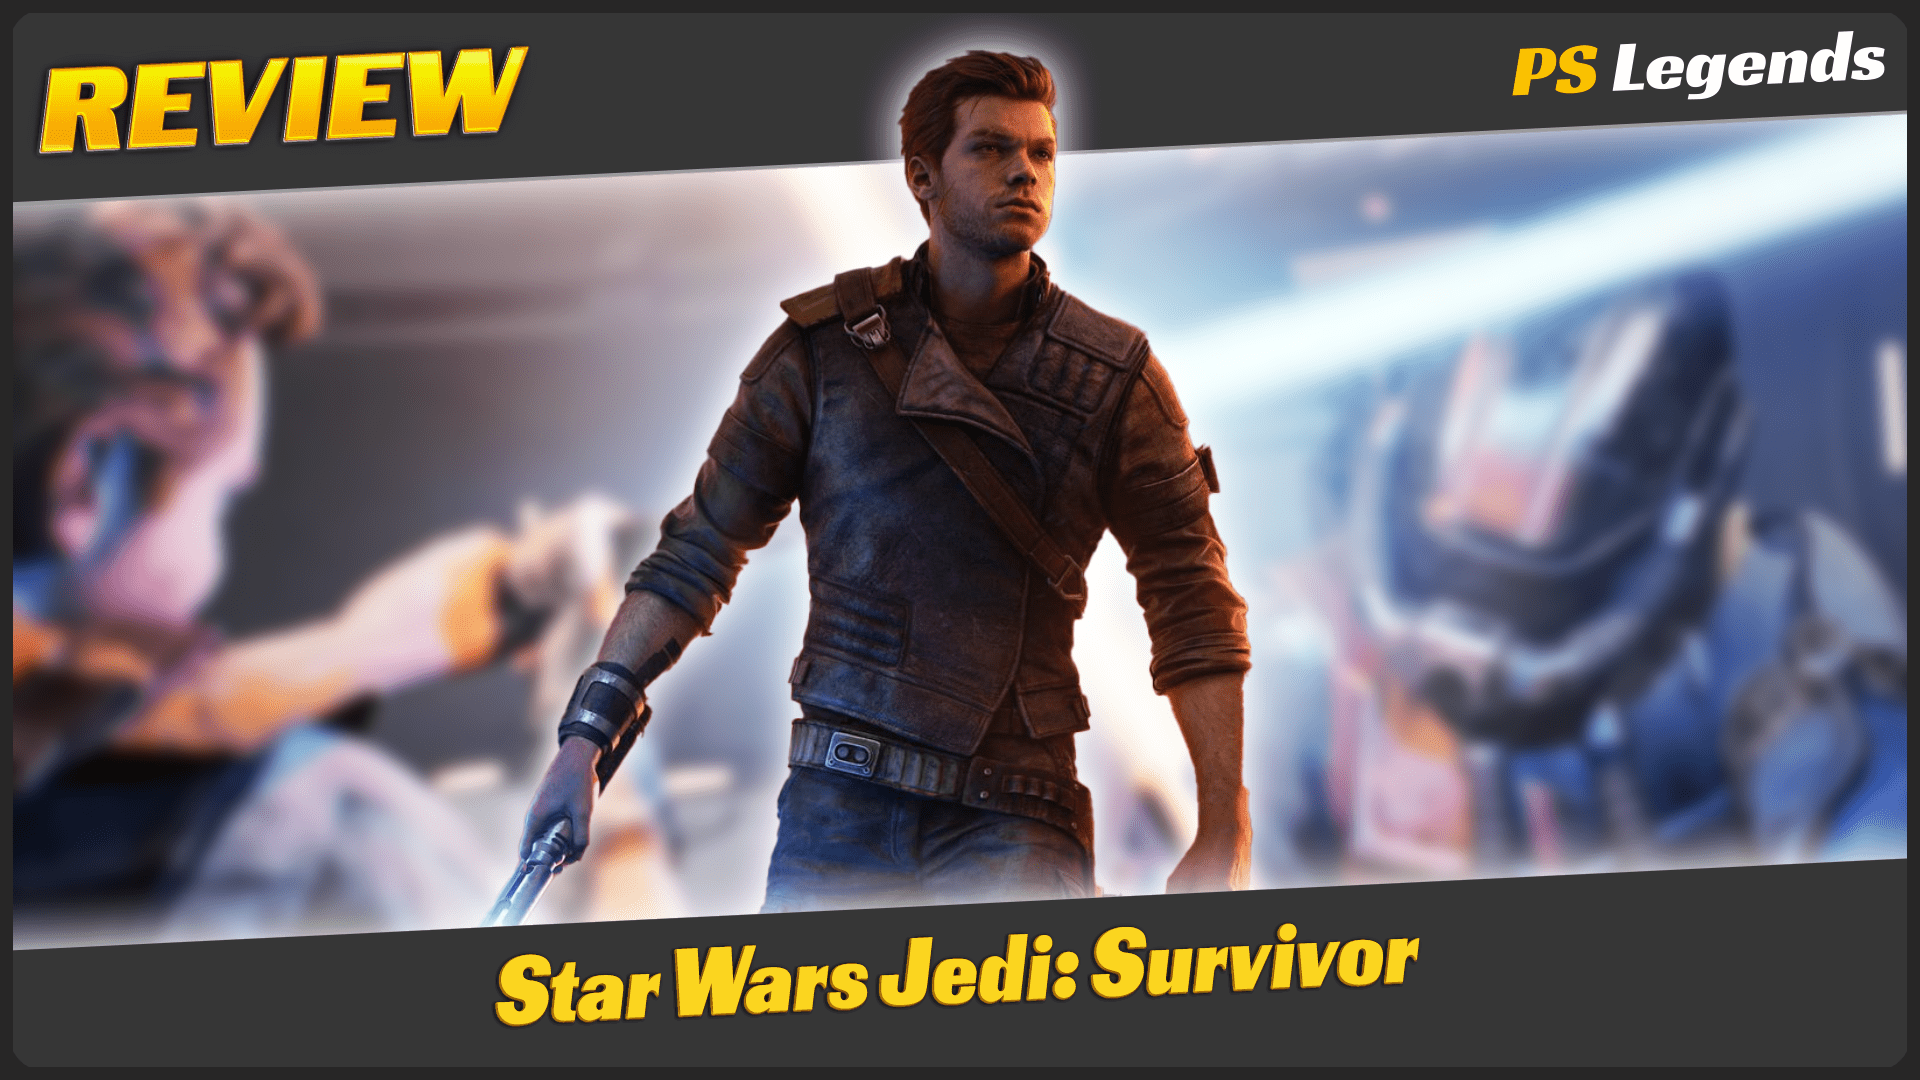 Star Wars Jedi: Survivor PS5 Crashing Issues and Fix Explained